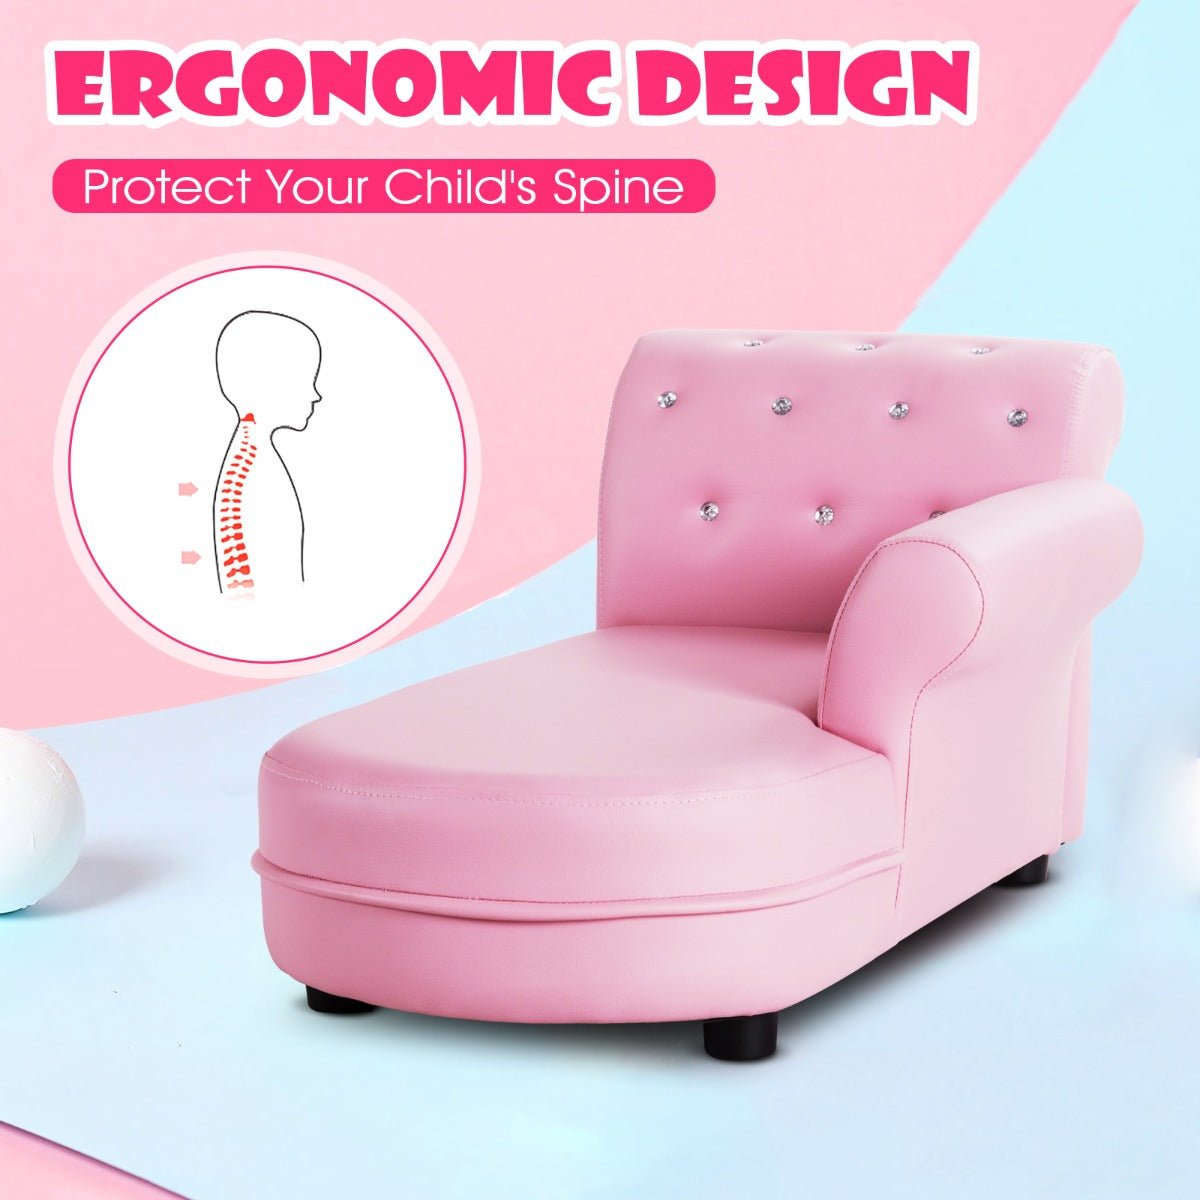 Kids Pink Sofa: PVC Leather and Crystal Details - Supreme Relaxation